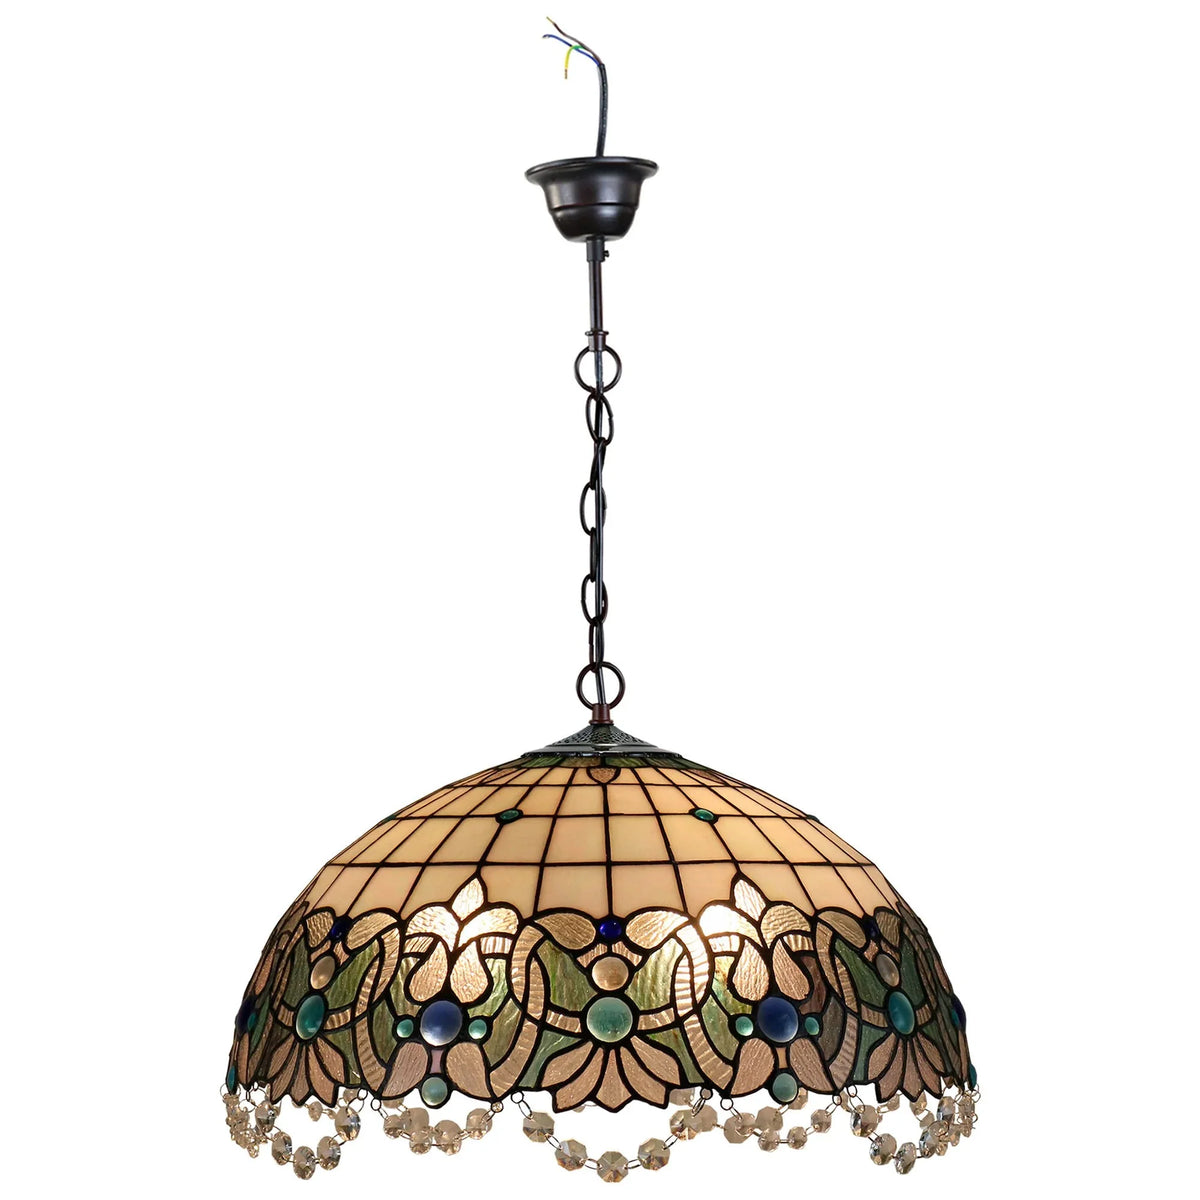 Shelby Tiffany Style Pendant Lamp - Teal & White - Notbrand